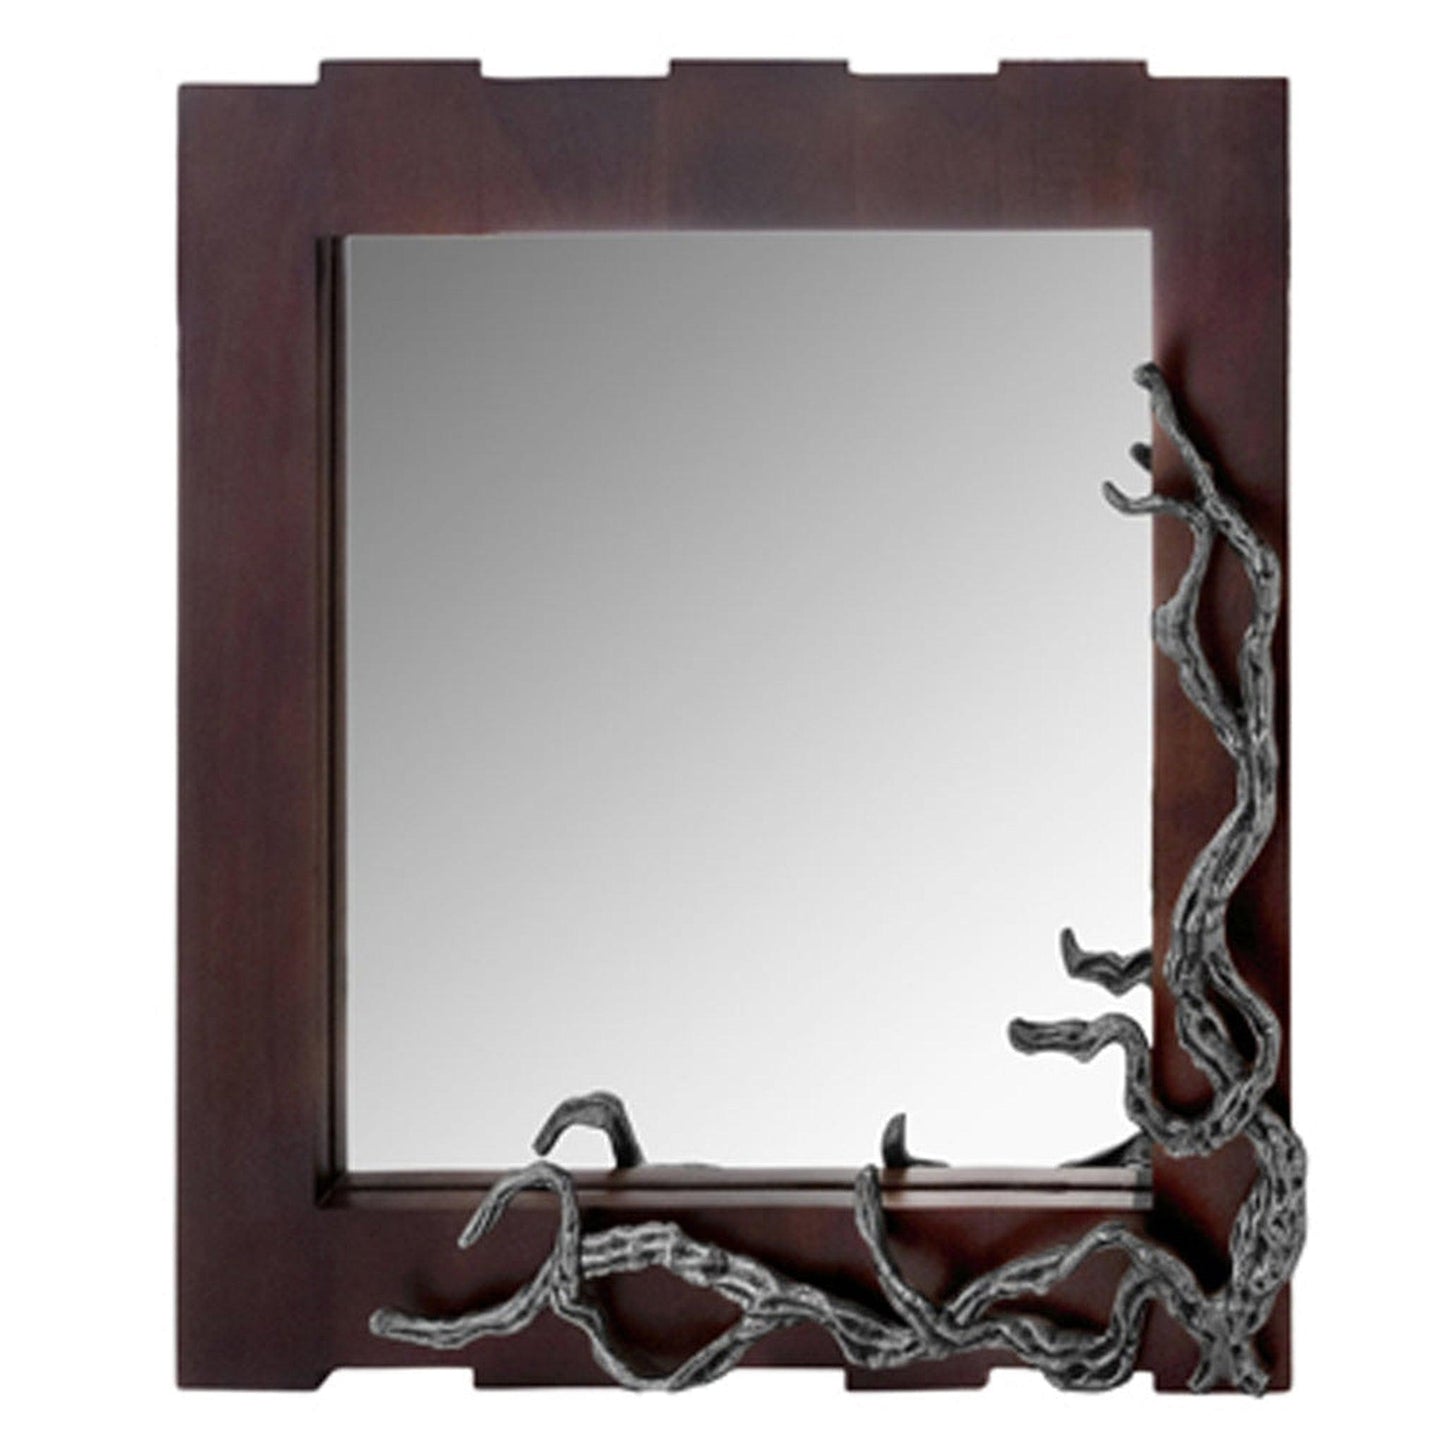 HomeRoots 3" x 33" x 32" Vine Wall Mirror With Brown and Silver Finish